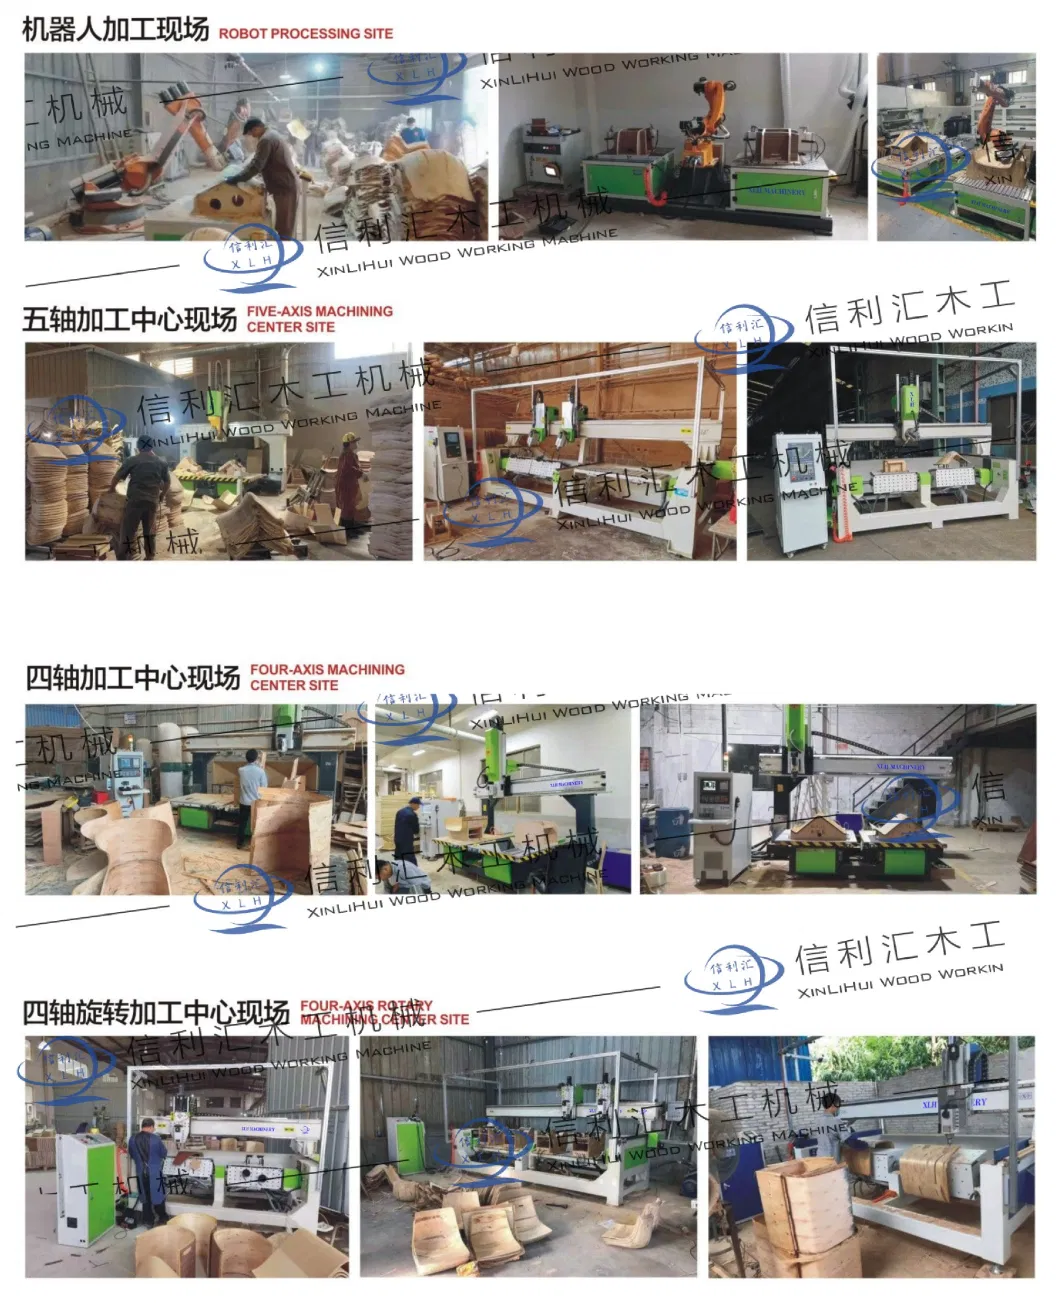 5 Axis Wood Carving Machine Wood Router CNC Router Woodworking Machine with 5 Axis Spindle Mold Prcessing Foam Cutter CNC Foam Cutting Router One Take